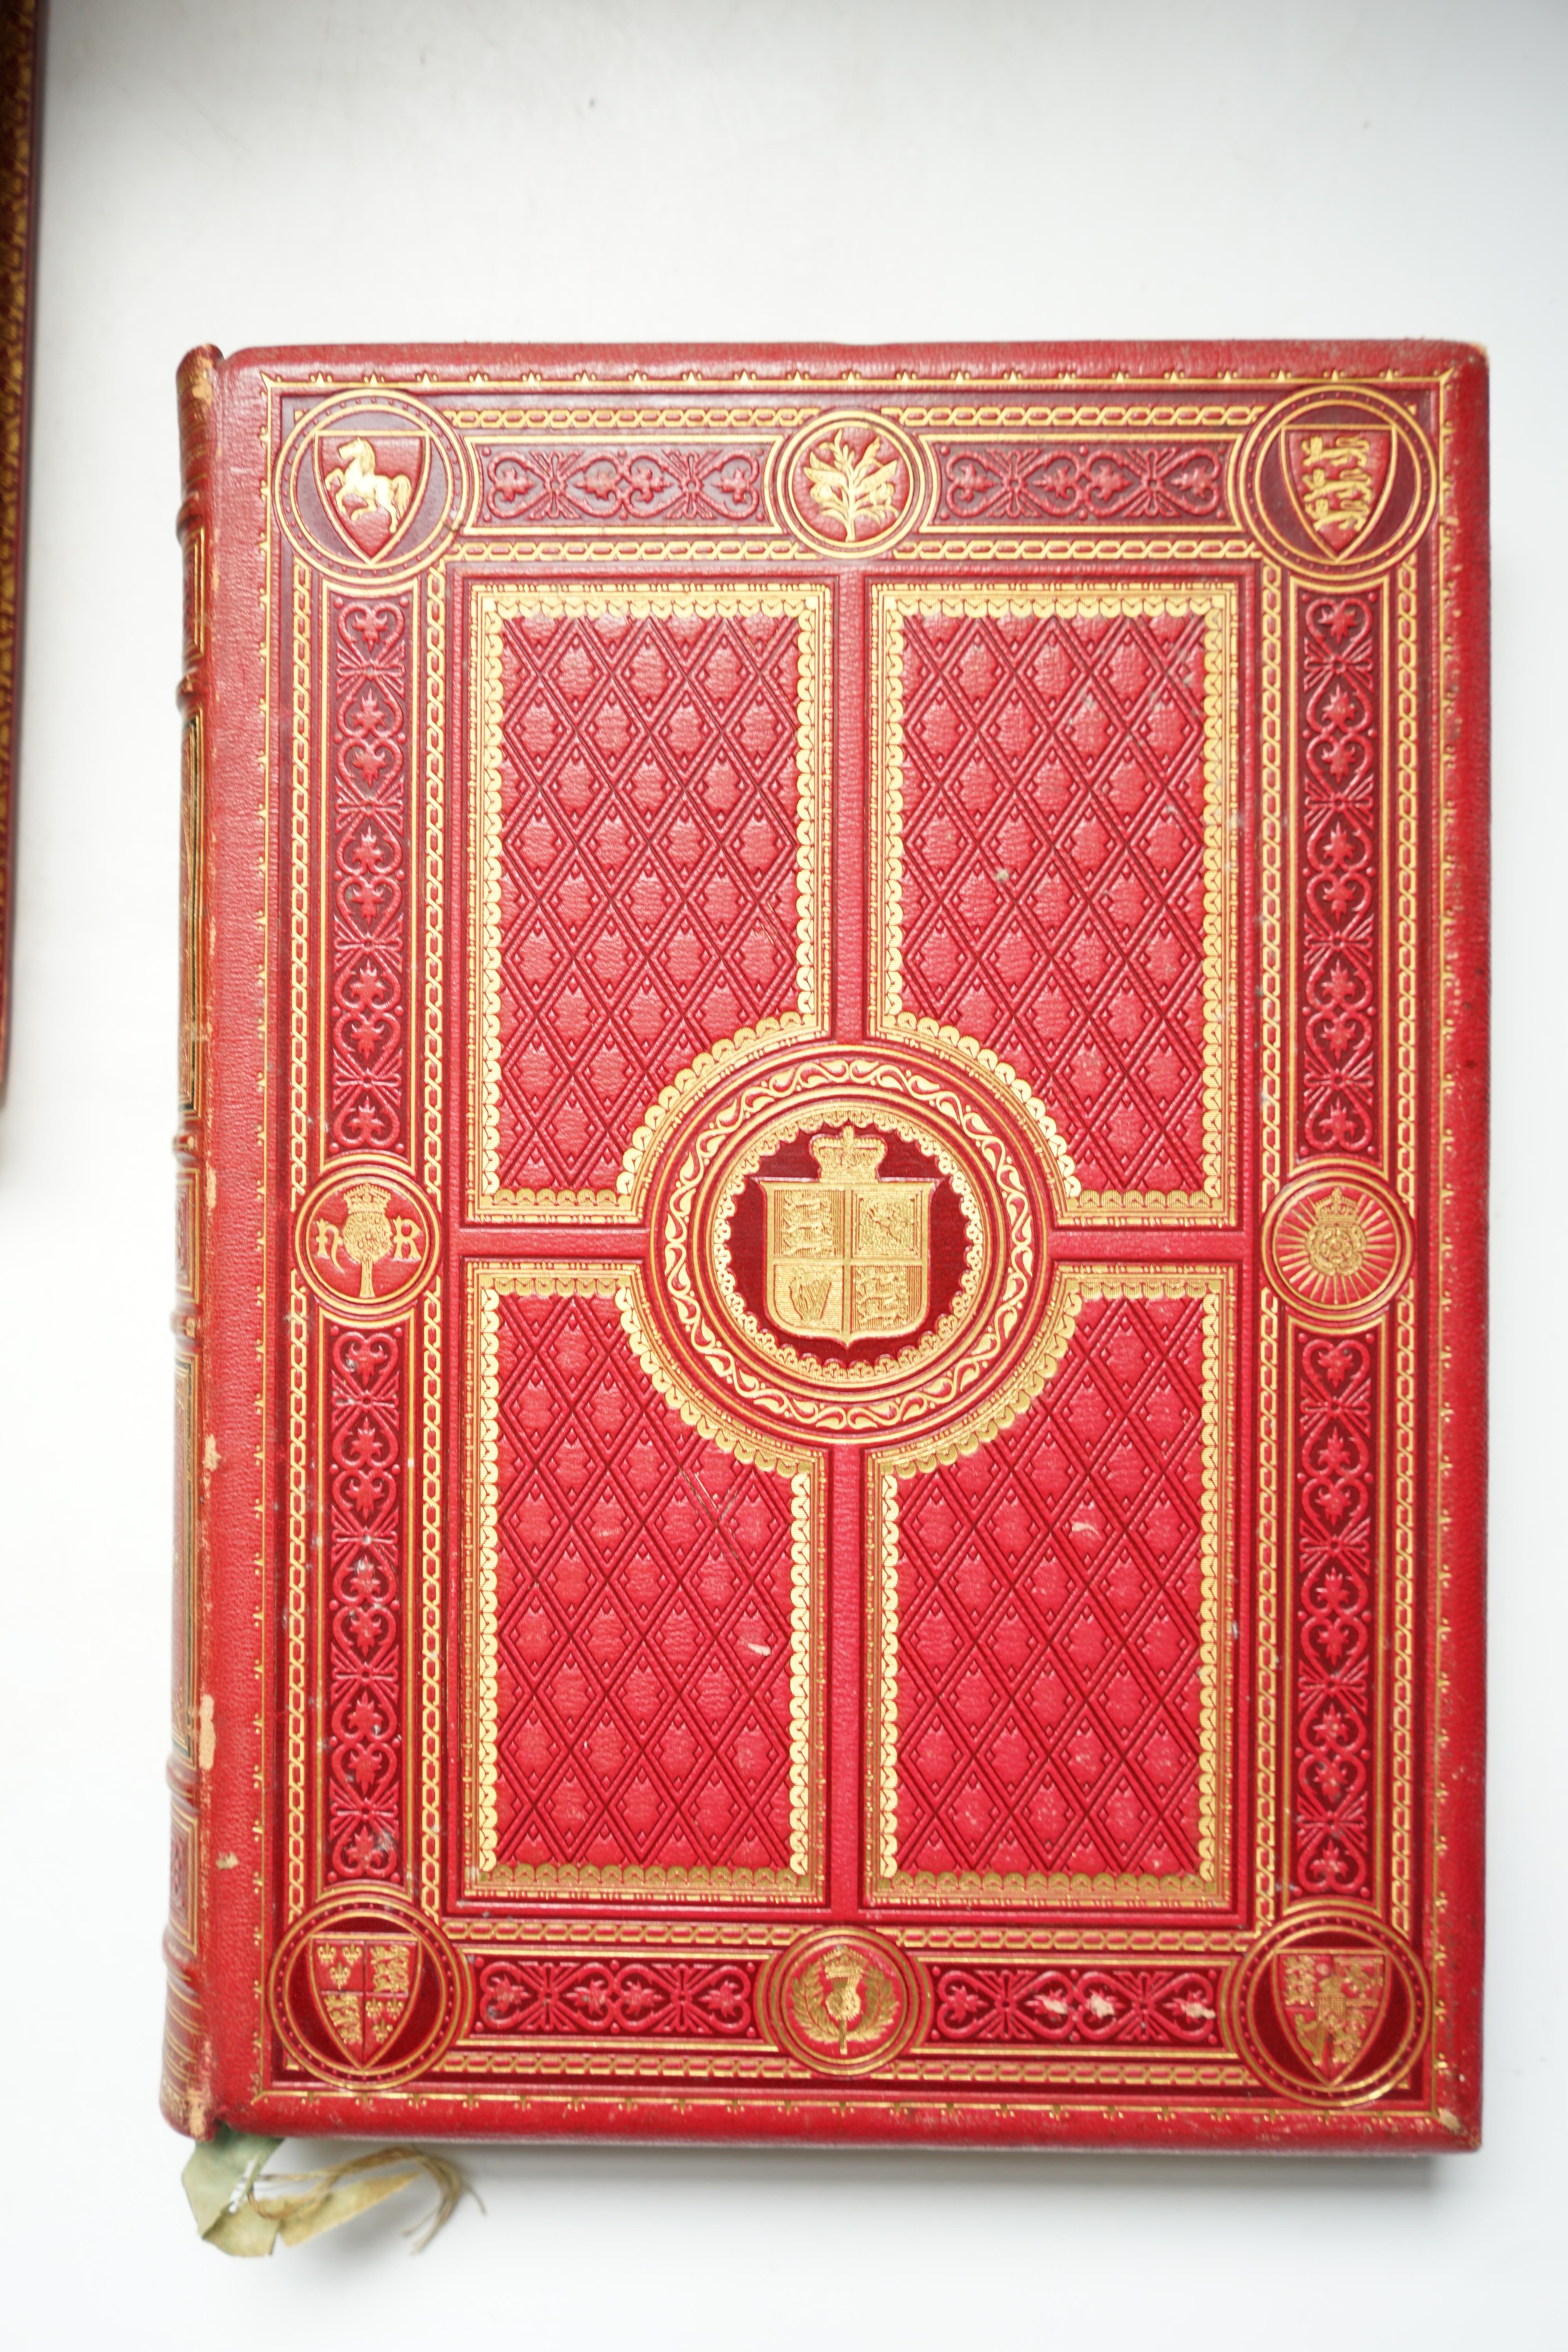 Archer, Thomas - Pictures and Royal Portraits illustrative of English and Scottish History, with an Introduction of Christianity to the Present Time, 2 vols, 4to, red leather gilt, illustrated with tinted plates, Blackie